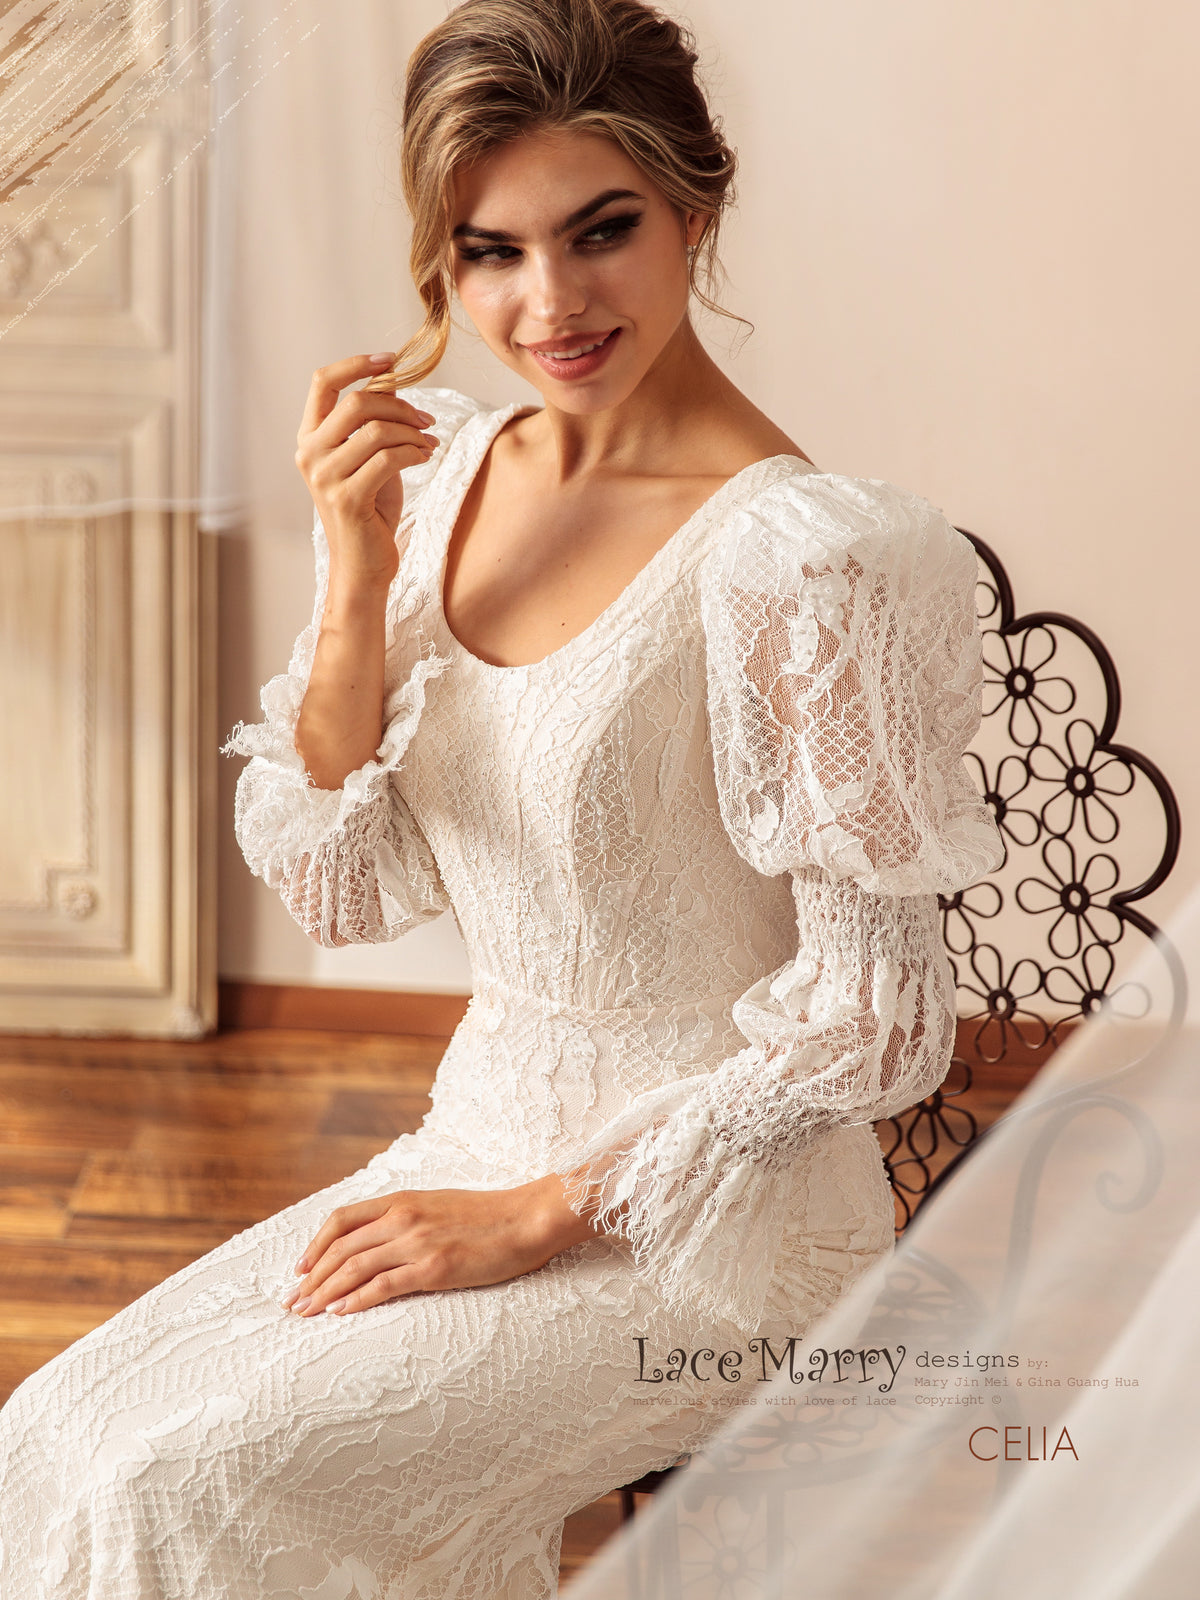 CELIA / Unique Lace Wedding Dress with Long Puff Sleeves